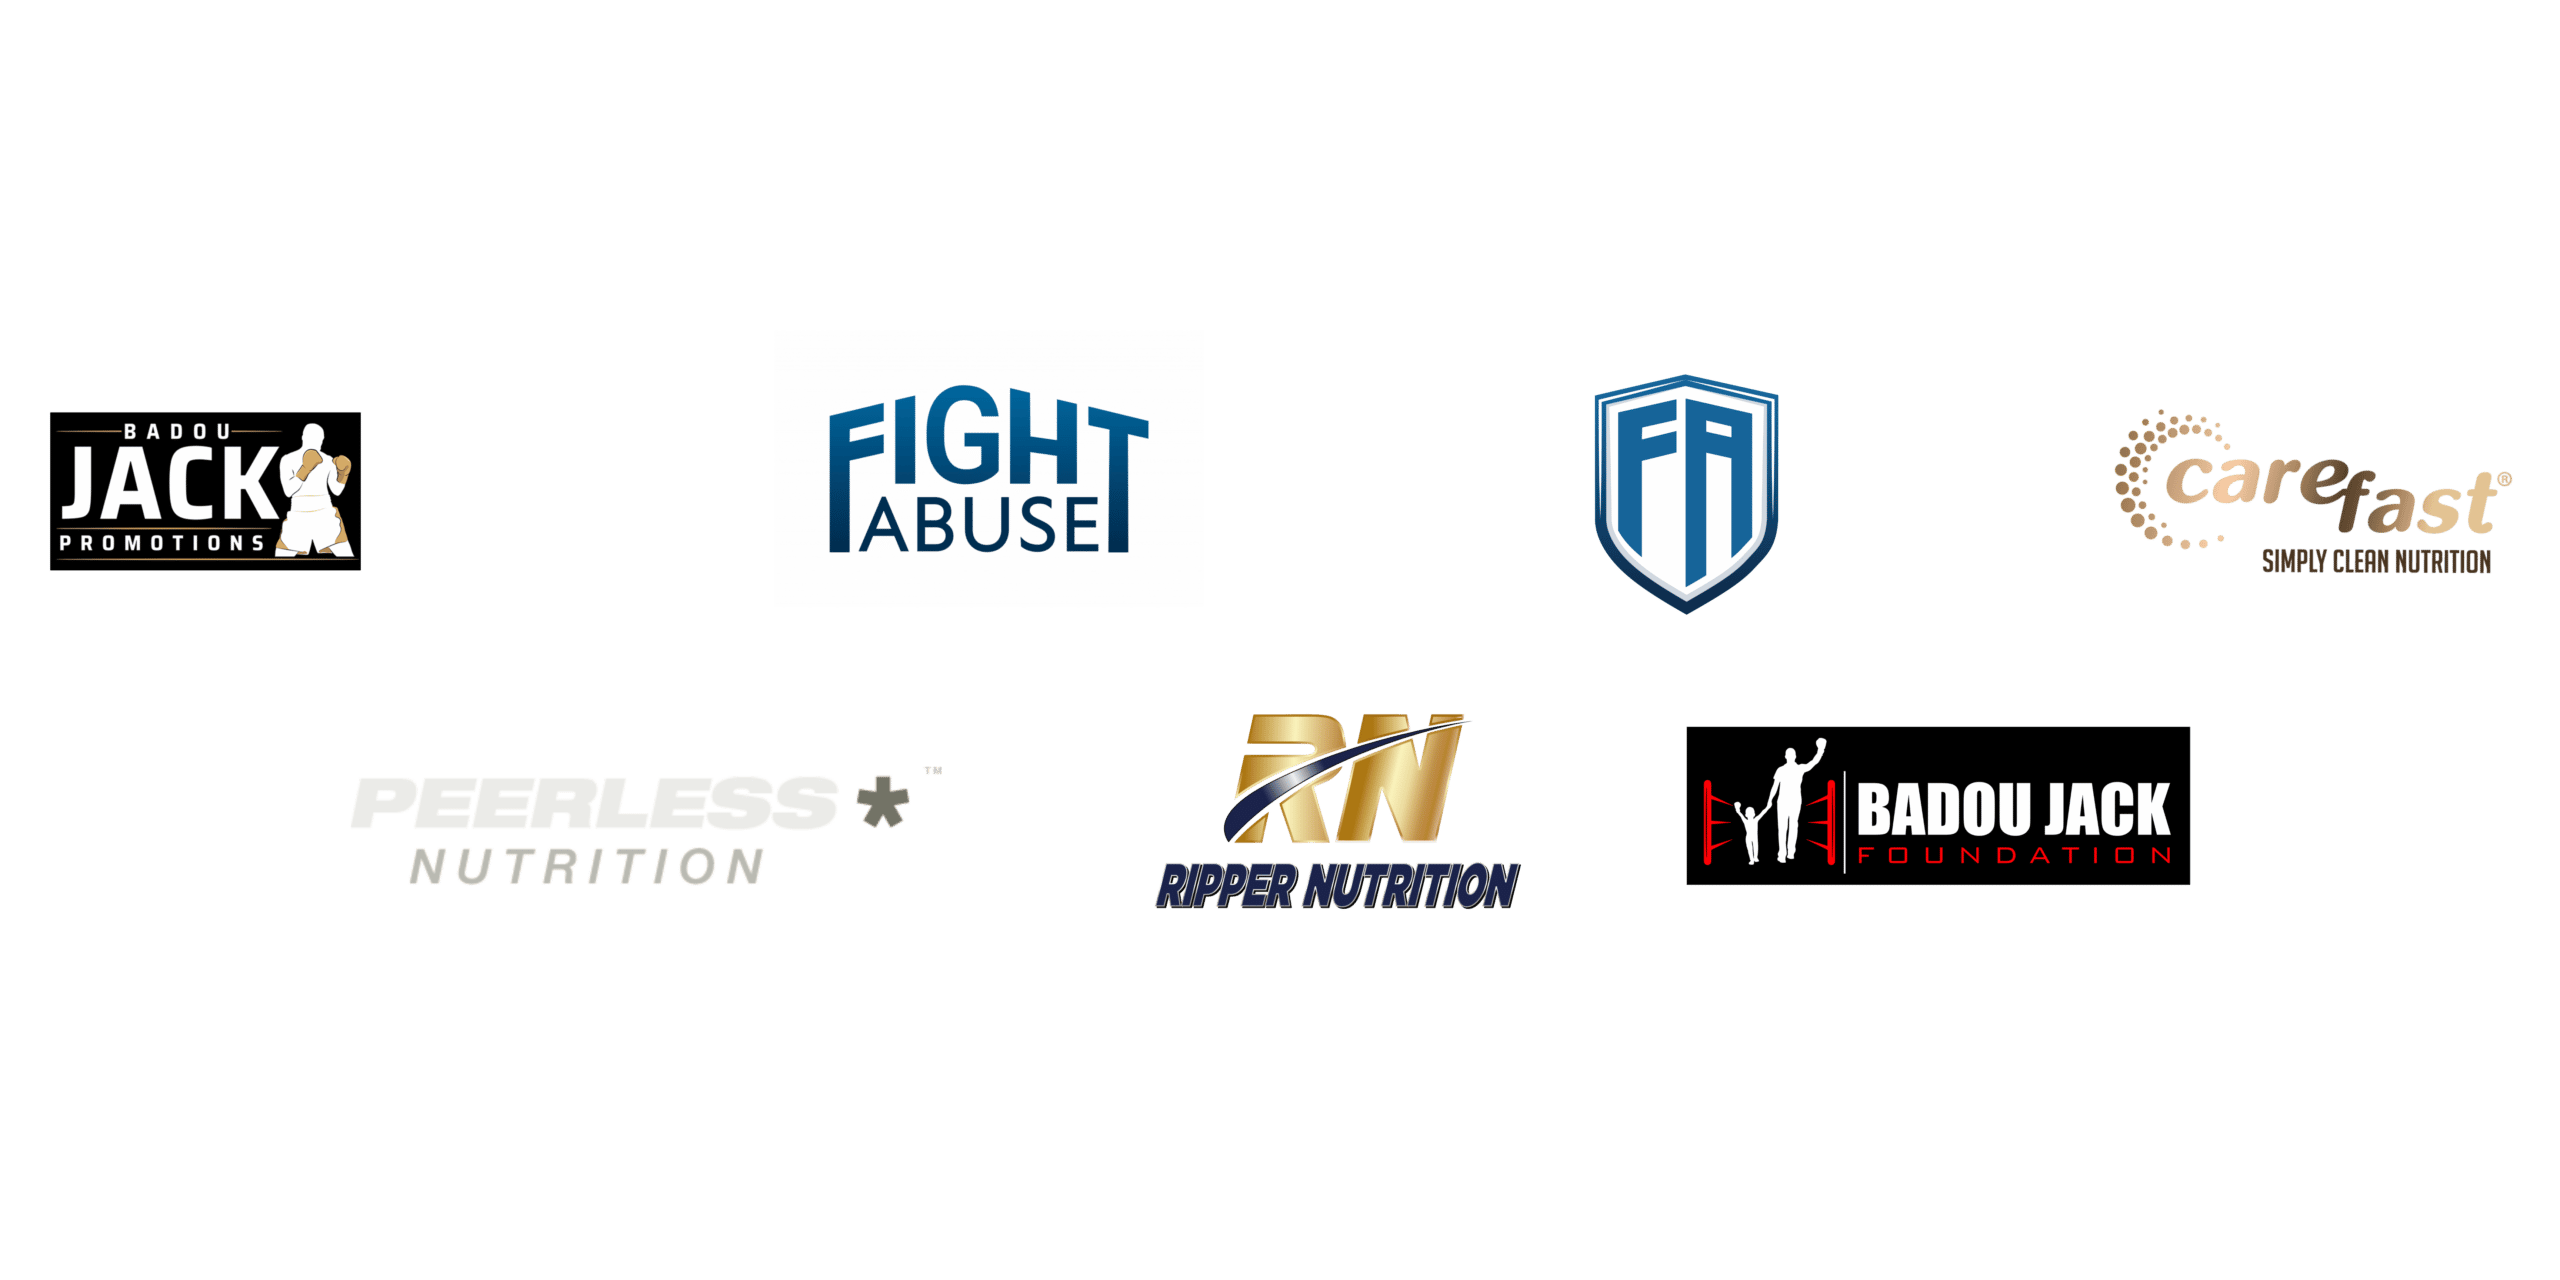 Our Partners' Logos